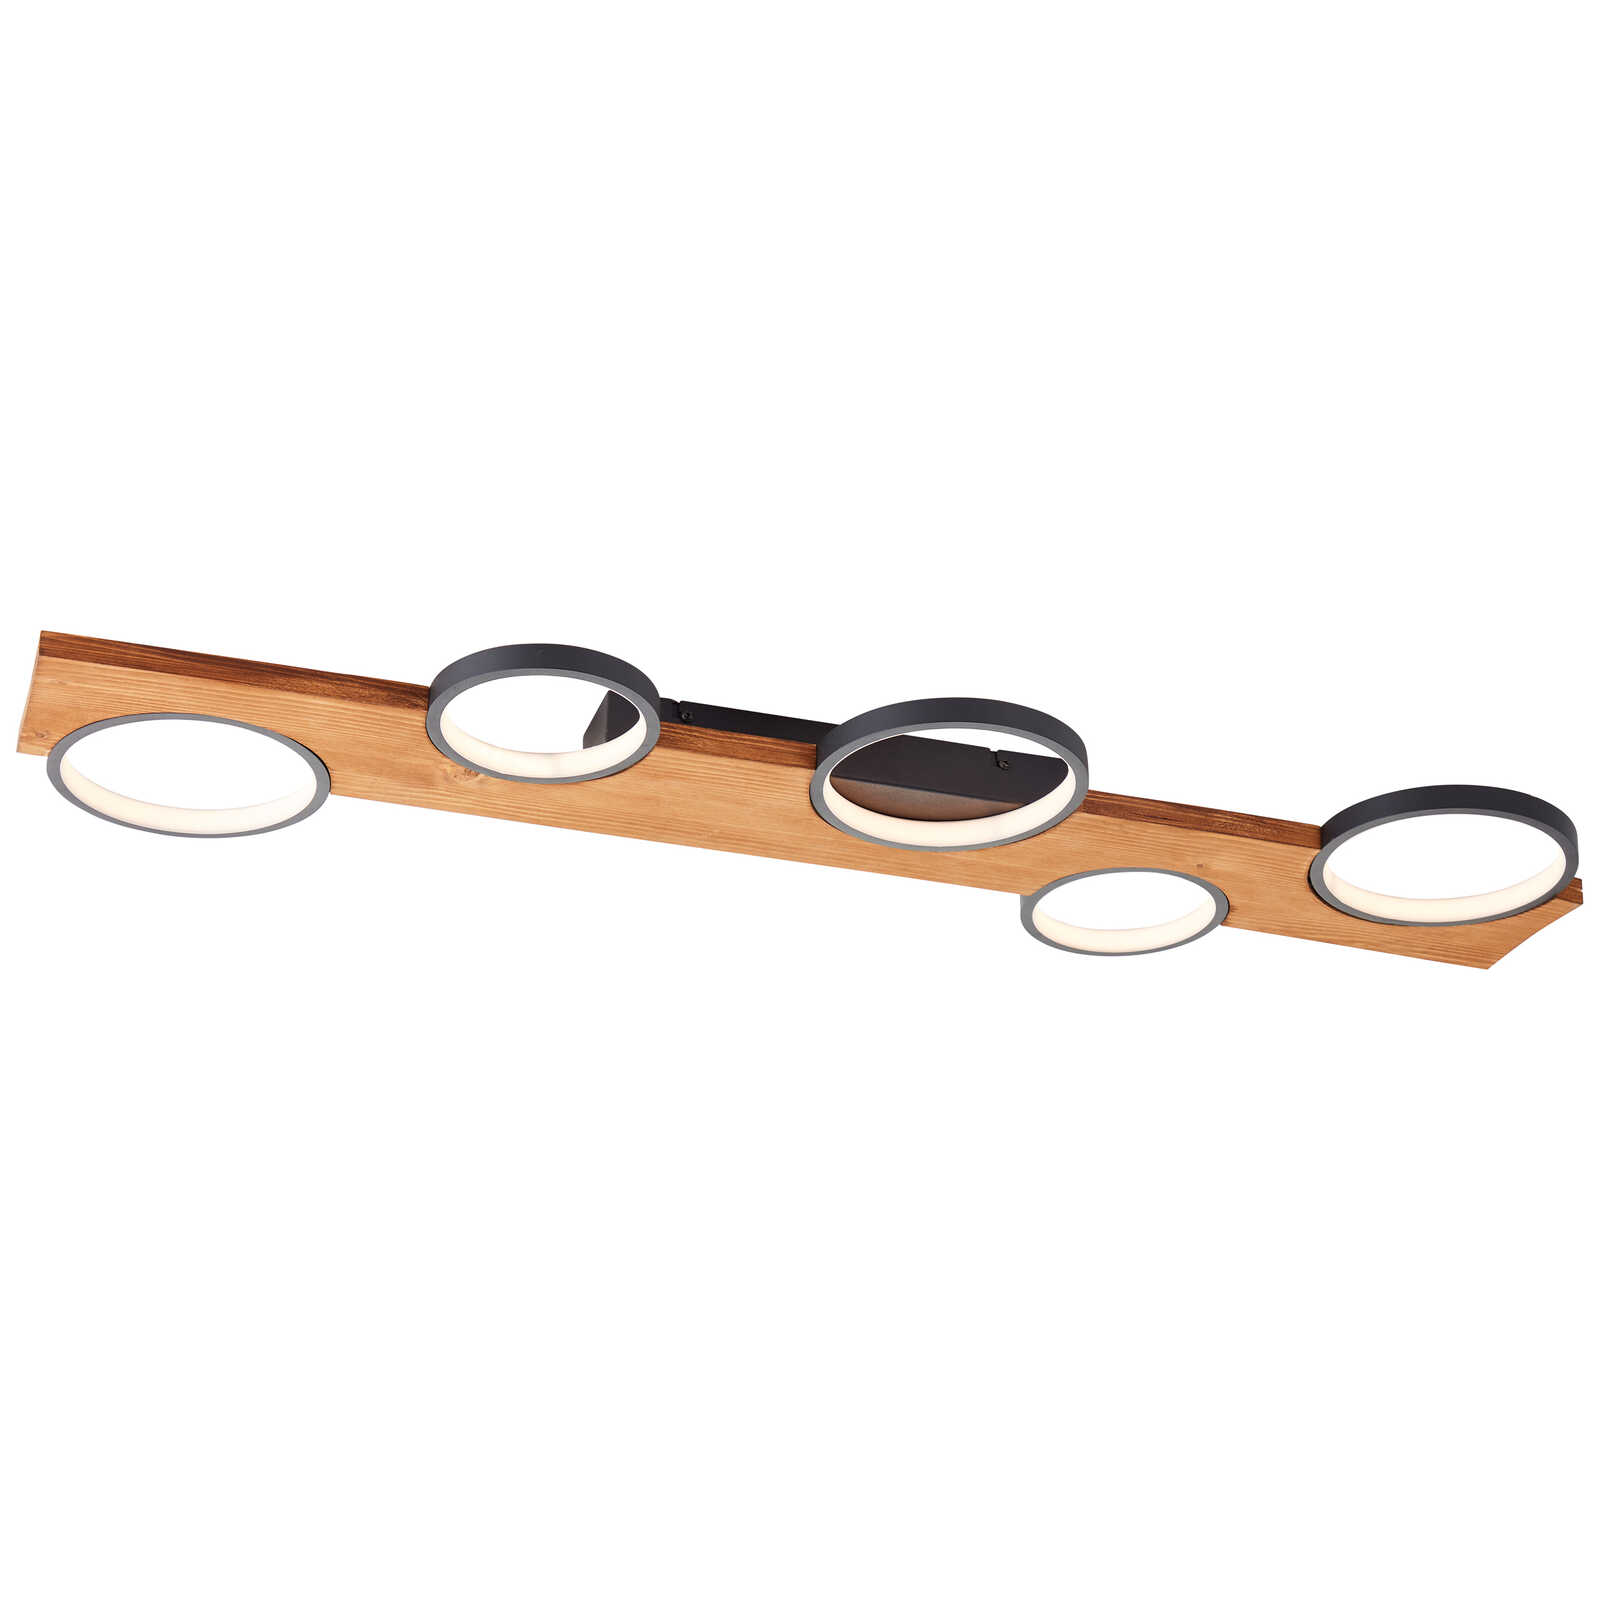             Wooden ceiling light - Lore - Brown
        